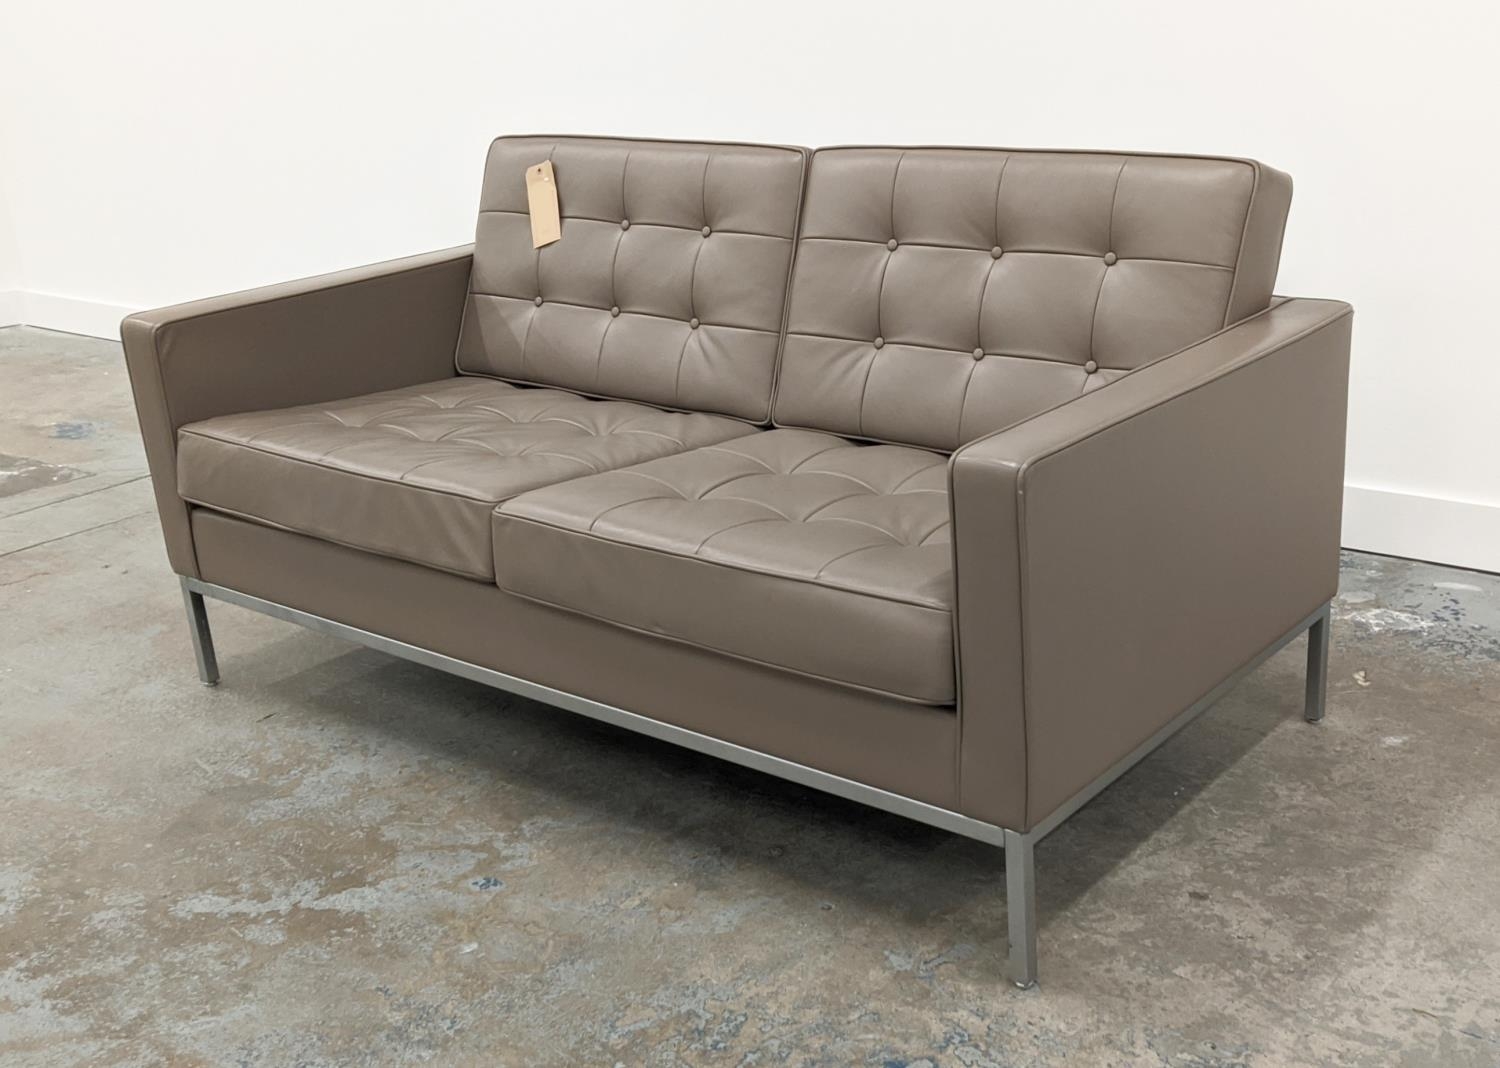 KNOLL FLORENCE KNOLL SOFA, by Florence Knoll, 159.5cm W. - Image 4 of 8